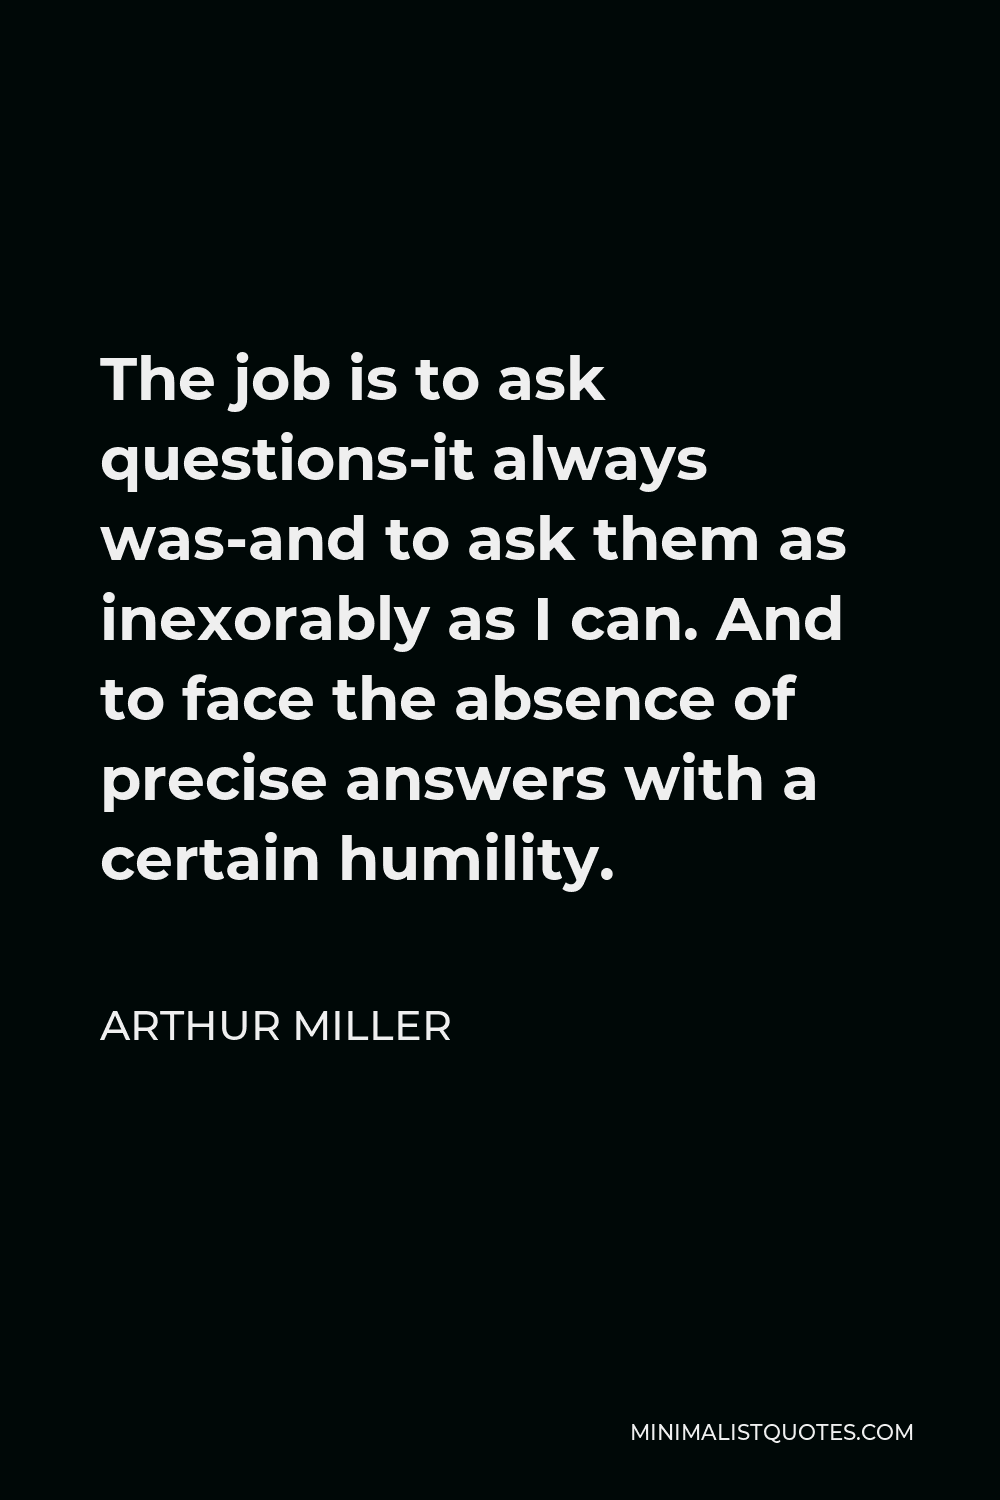 Arthur Miller Quote - The job is to ask questions-it always was-and to ask them as inexorably as I can. And to face the absence of precise answers with a certain humility.